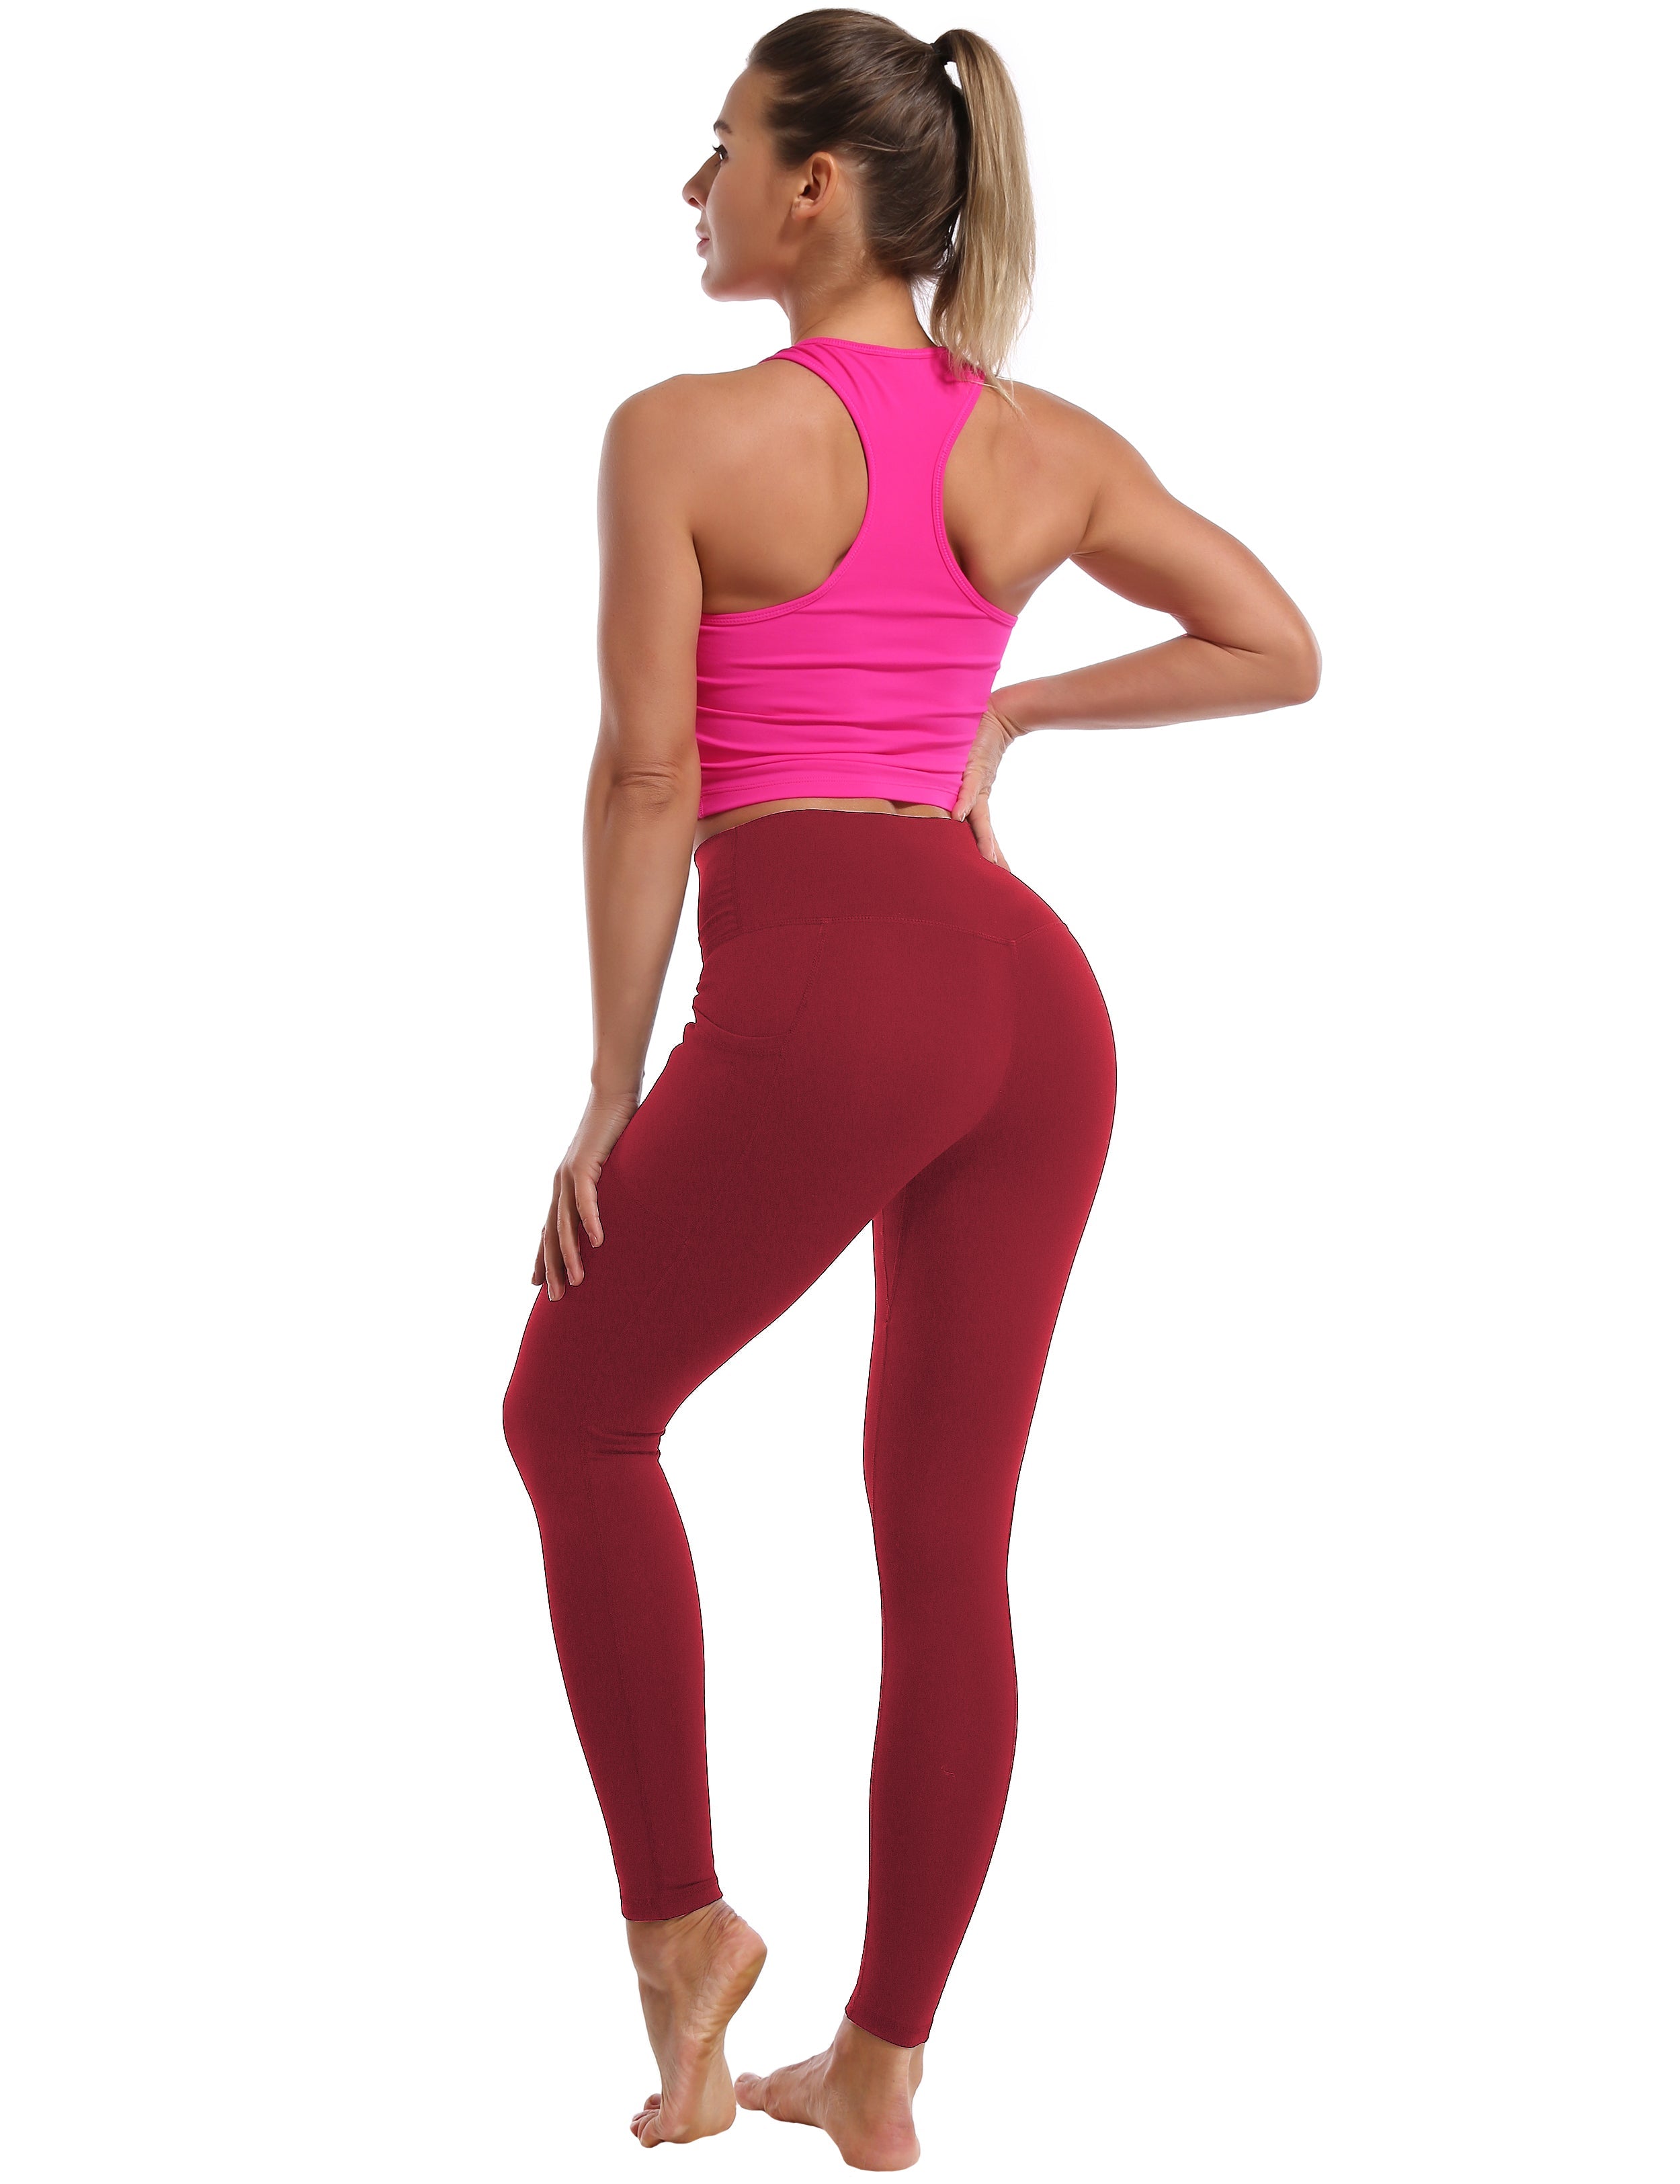 High Waisted Running Pants 7/8 Length Leggings with Pockets red_Running